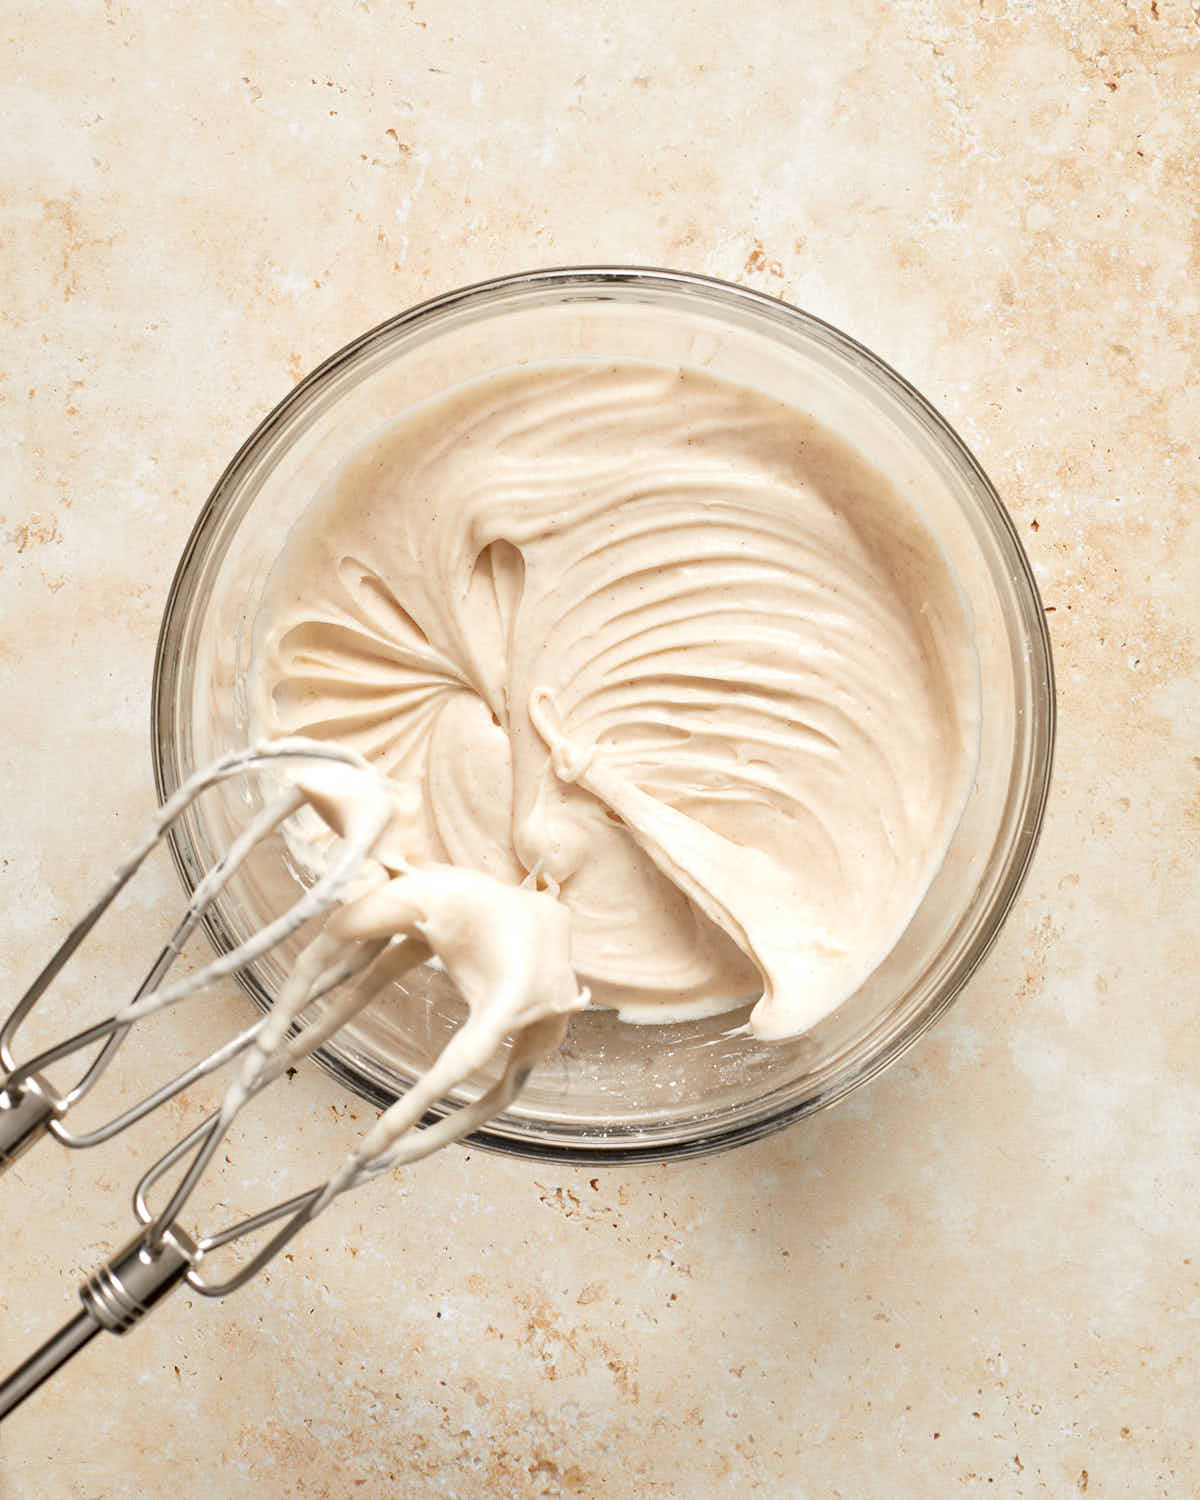 Cinnamon cream cheese frosting in a glass bowl.